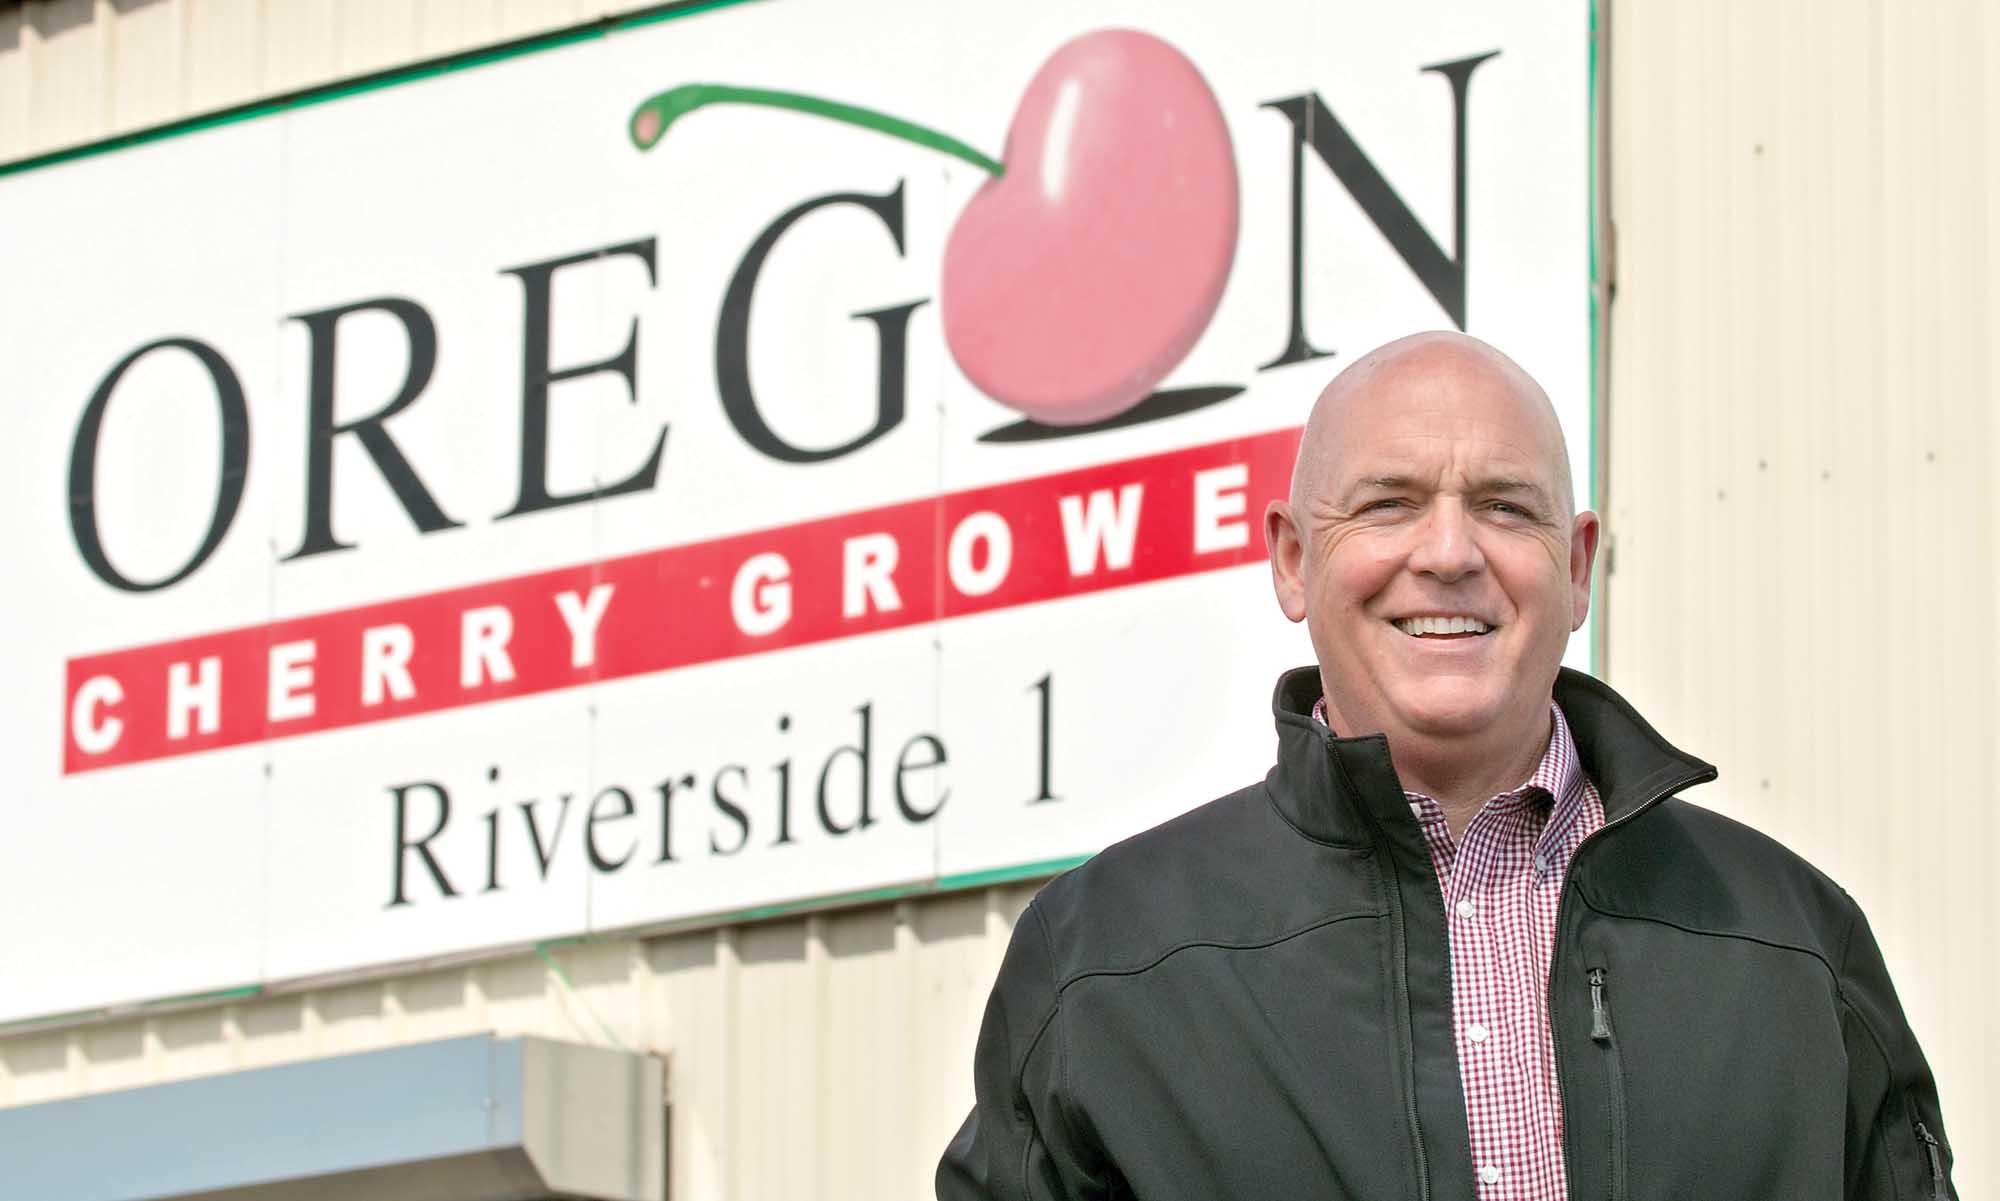 Tim Ramsey begins his third season as president and chief executive of Oregon Cherry Growers in The Dalles, Oregon on April 8, 2015.(TJ Mullinax/Good Fruit Grower)